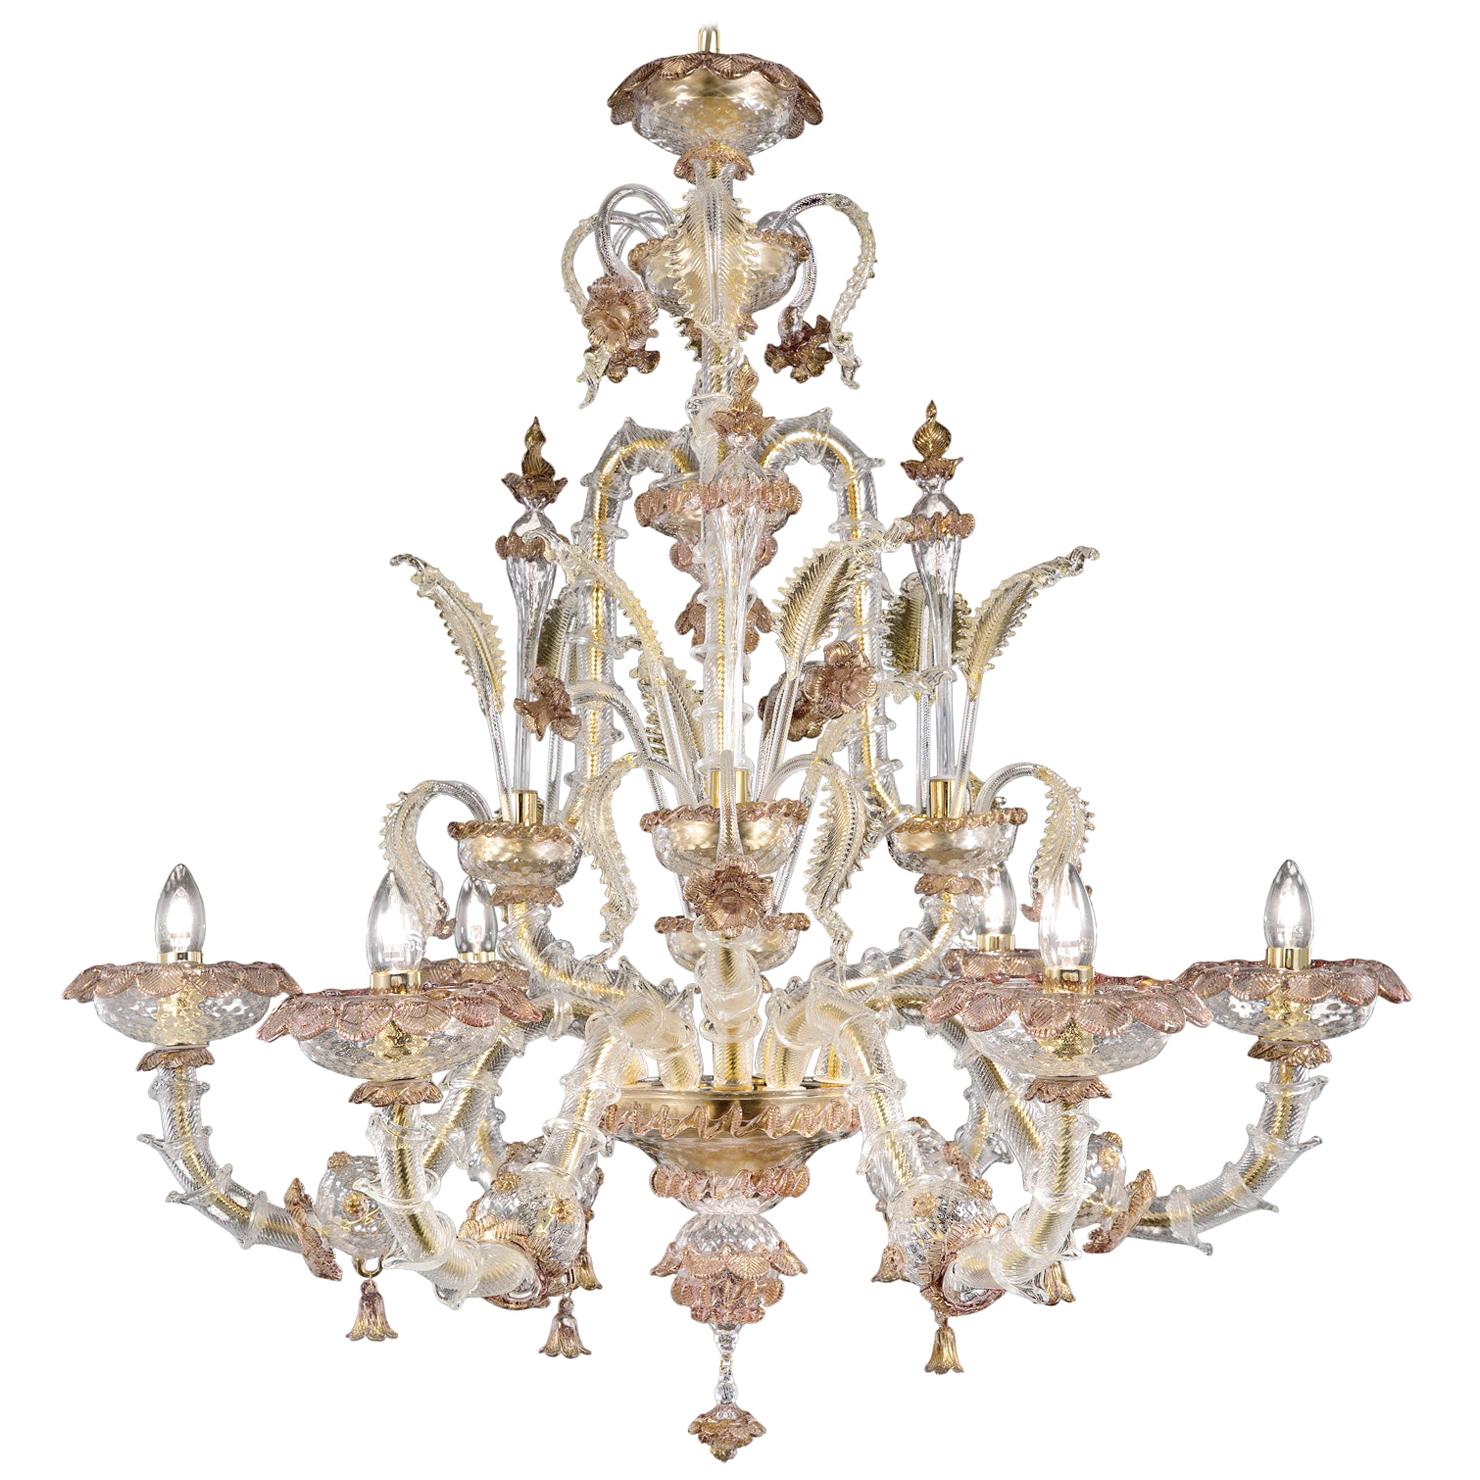 Chandelier 6 arms Crystal and Gold Murano glass  Amethyst Details by Multiforme